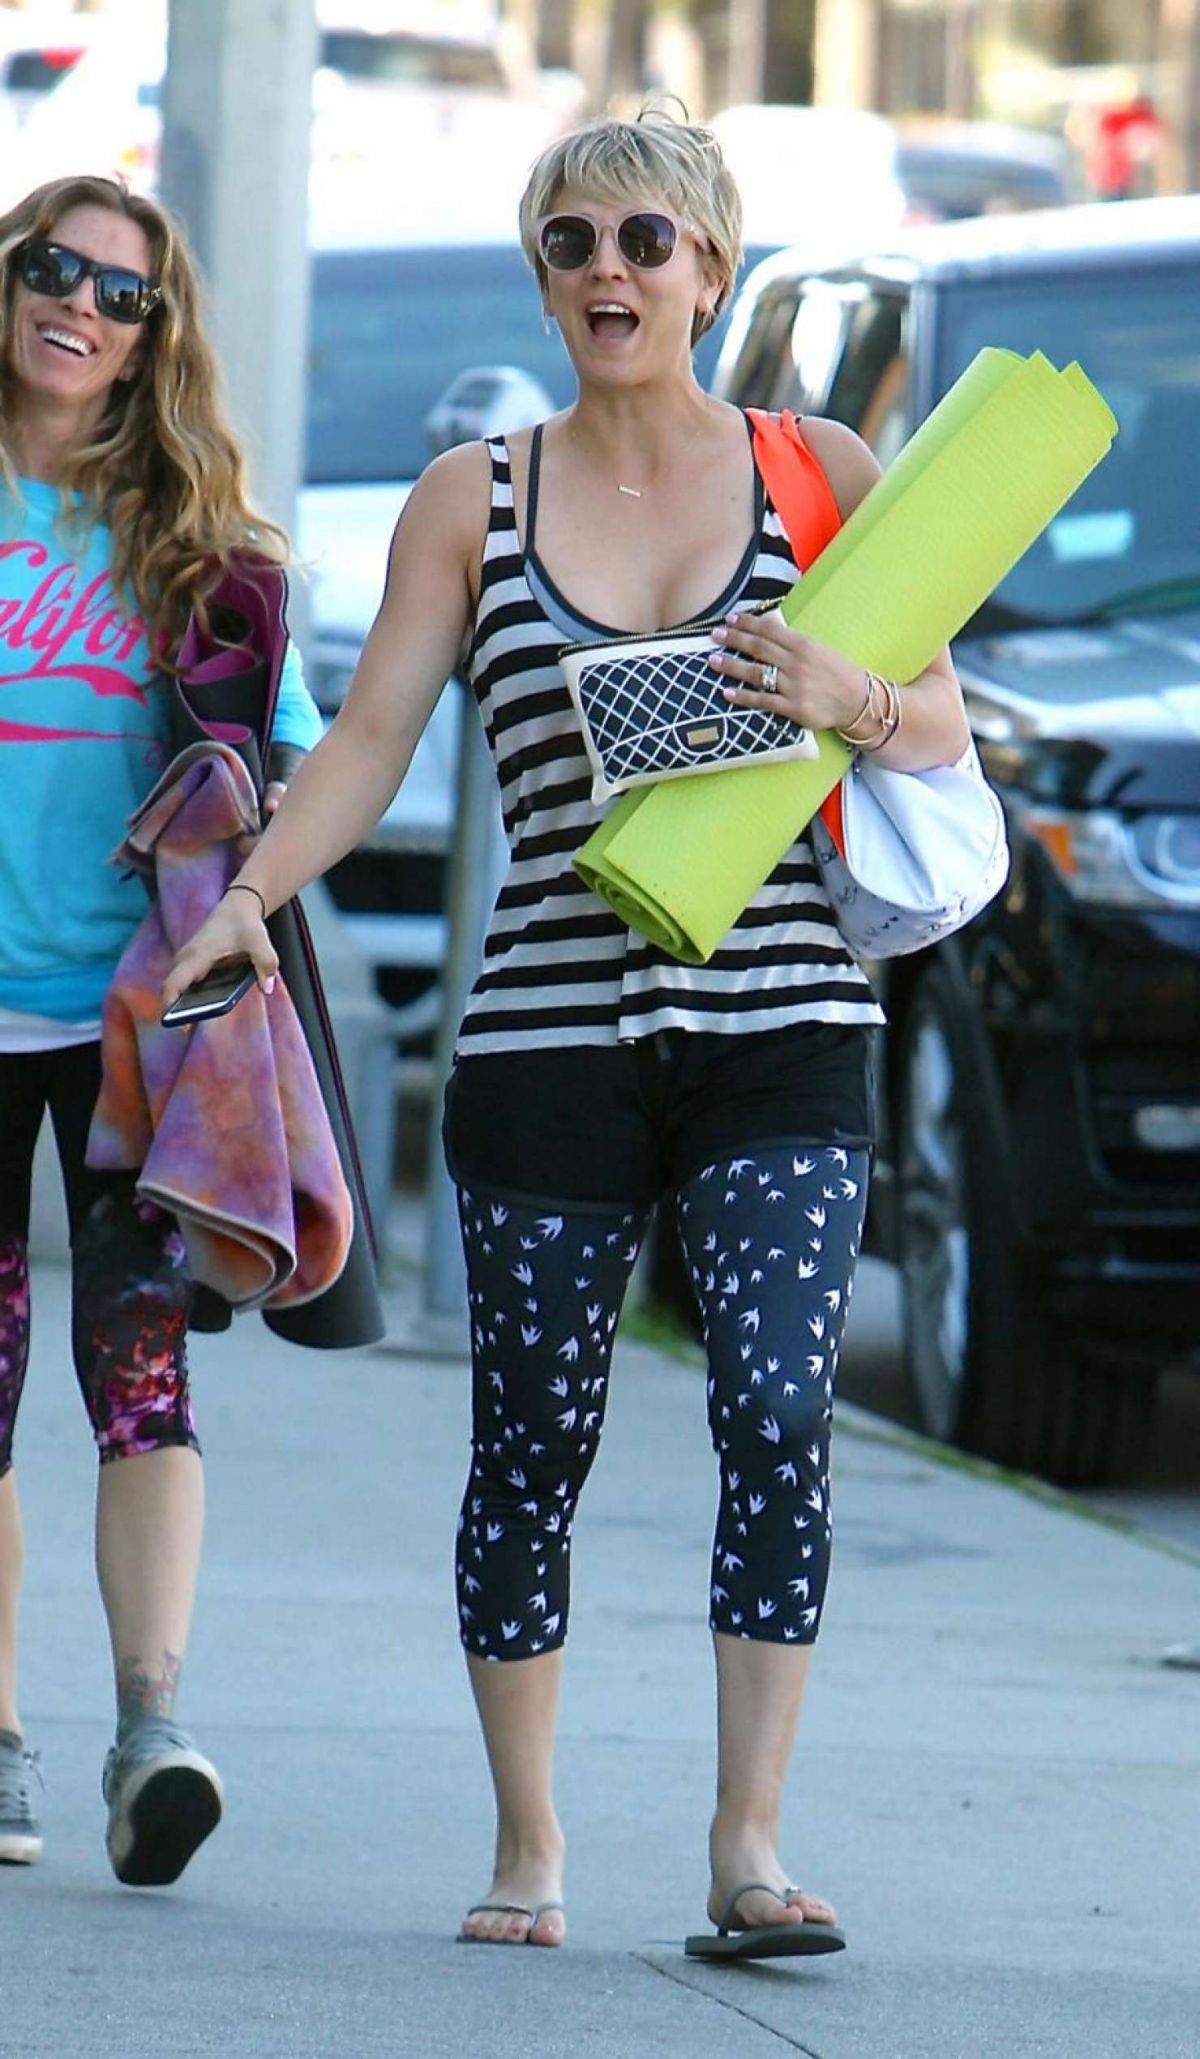 KALEY CUOCO in Leggings Heading to Yoga Class in Brentwood.